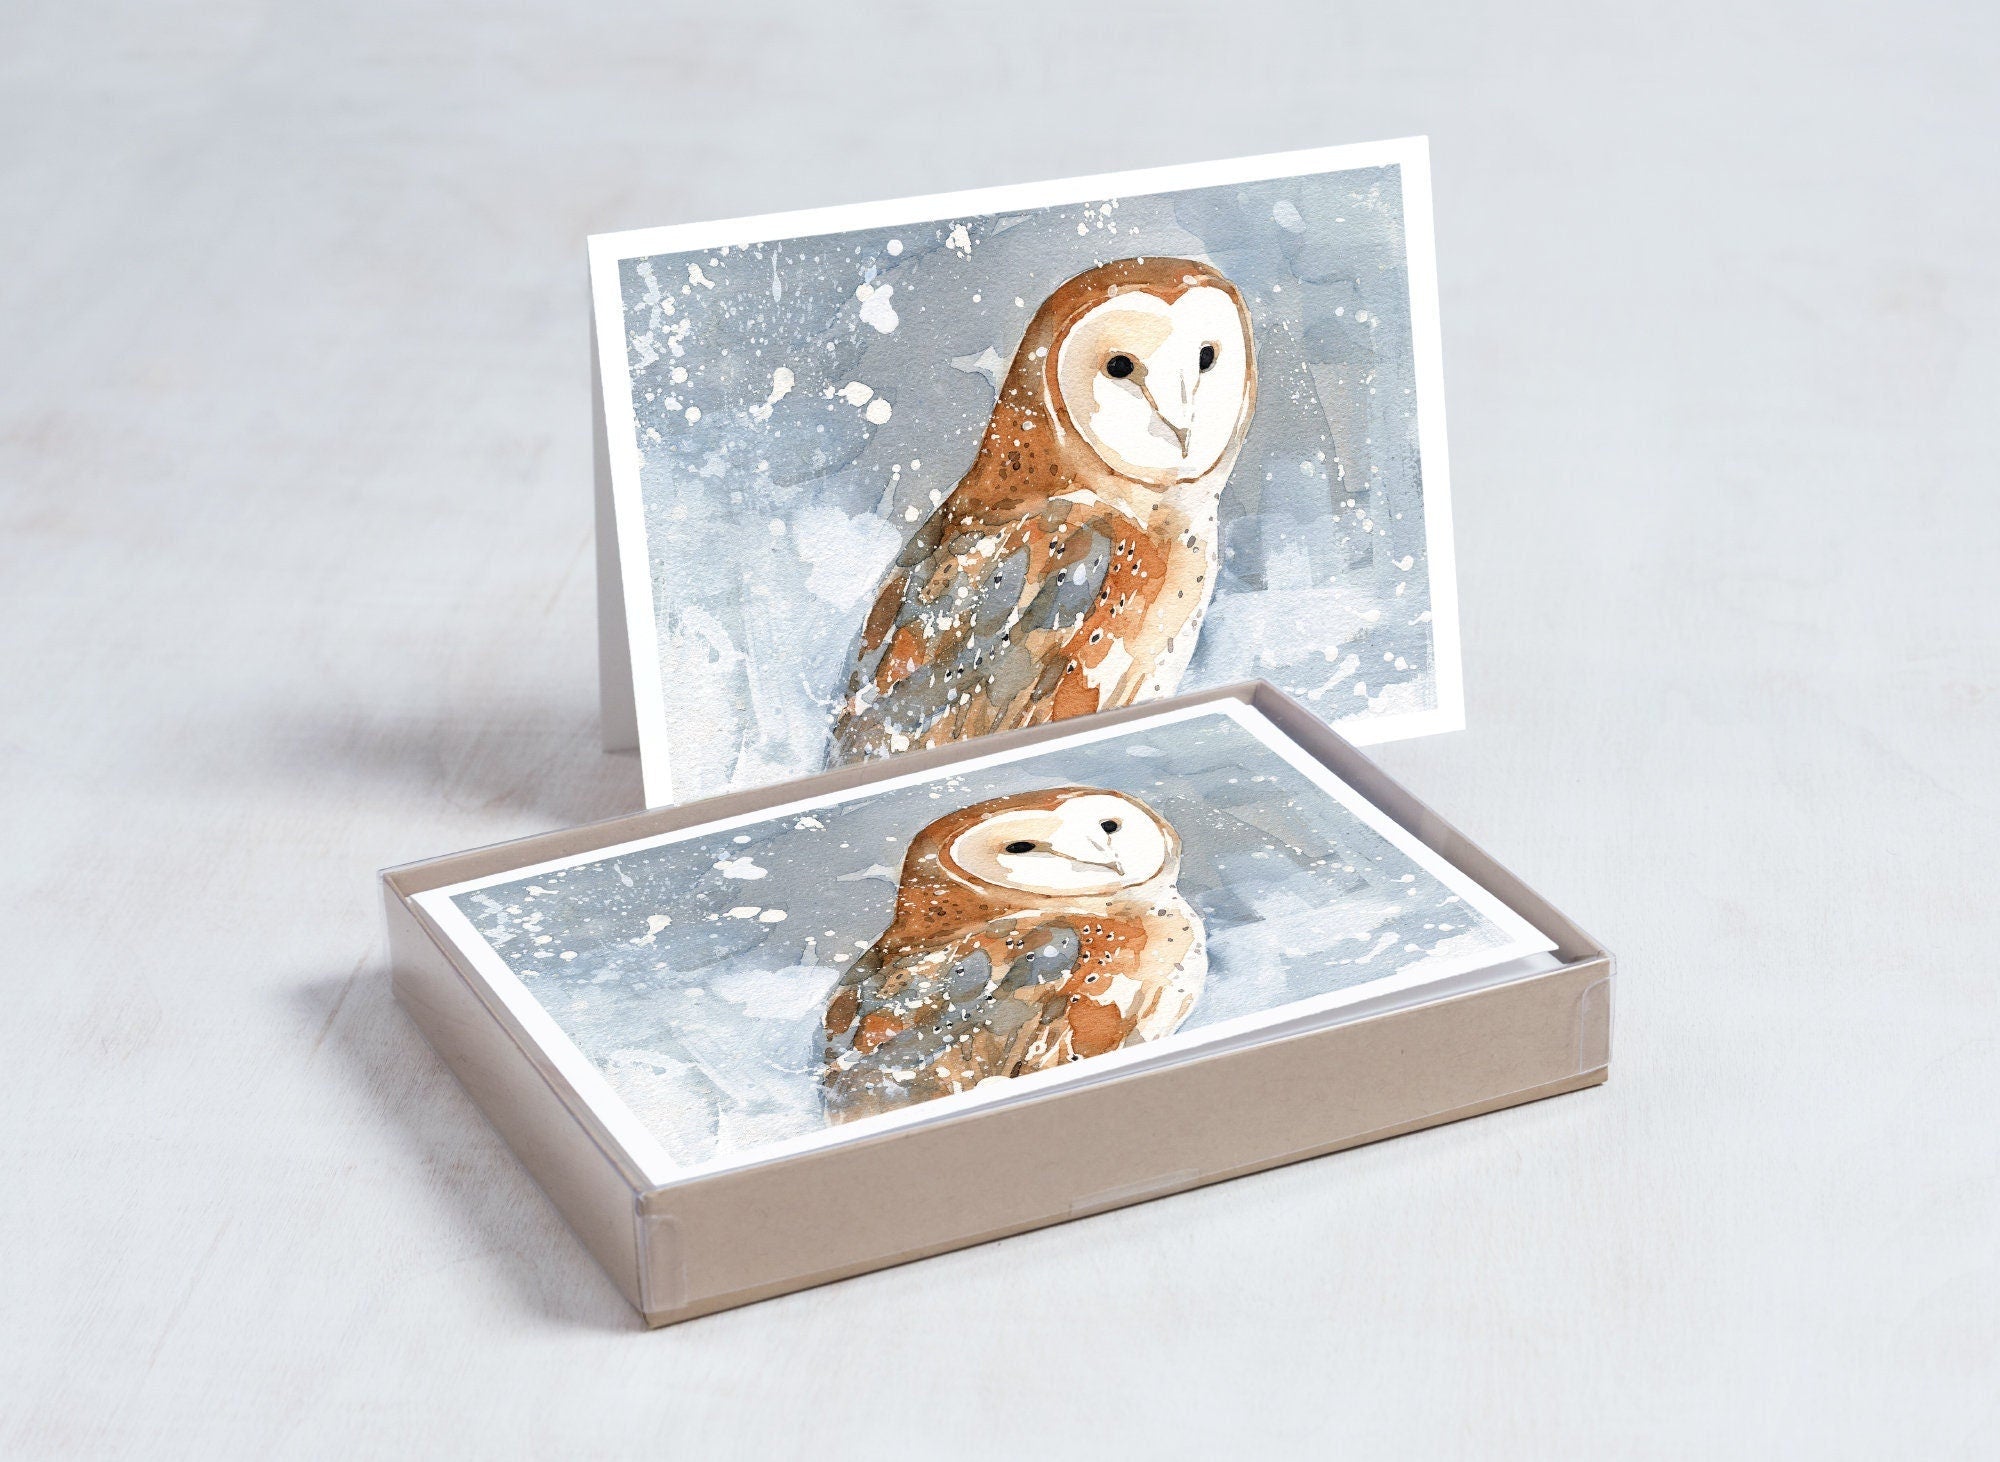 Barn Owl in Snow Christmas Card Set, Winter Bird Rustic Country Holiday Cards